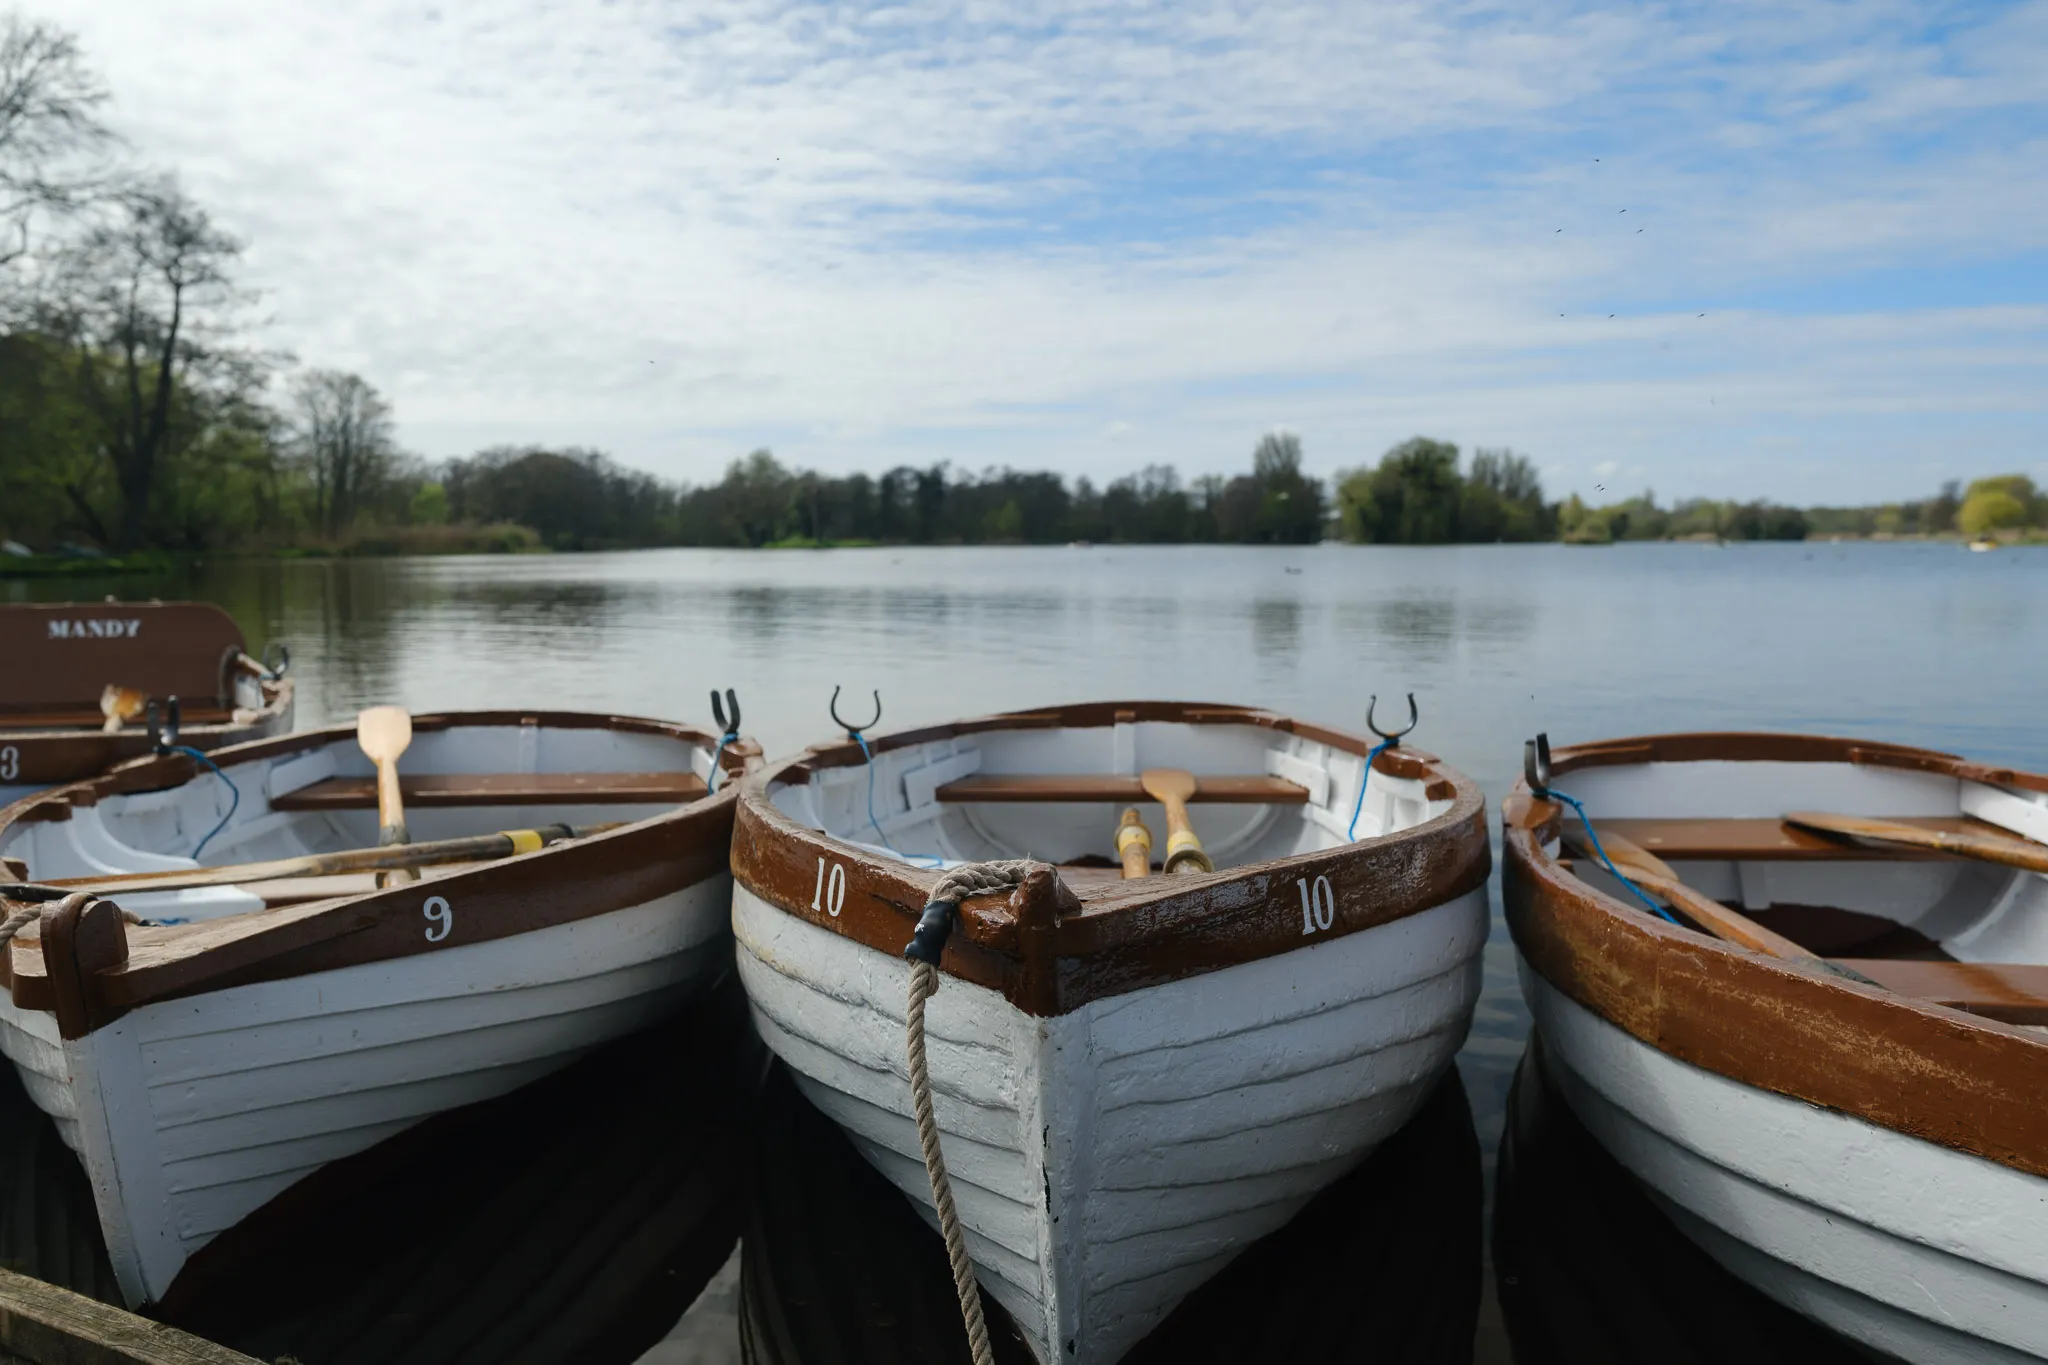 three small boats tied to a dock on a lake with tress and a cloudy, blue sky in the background.